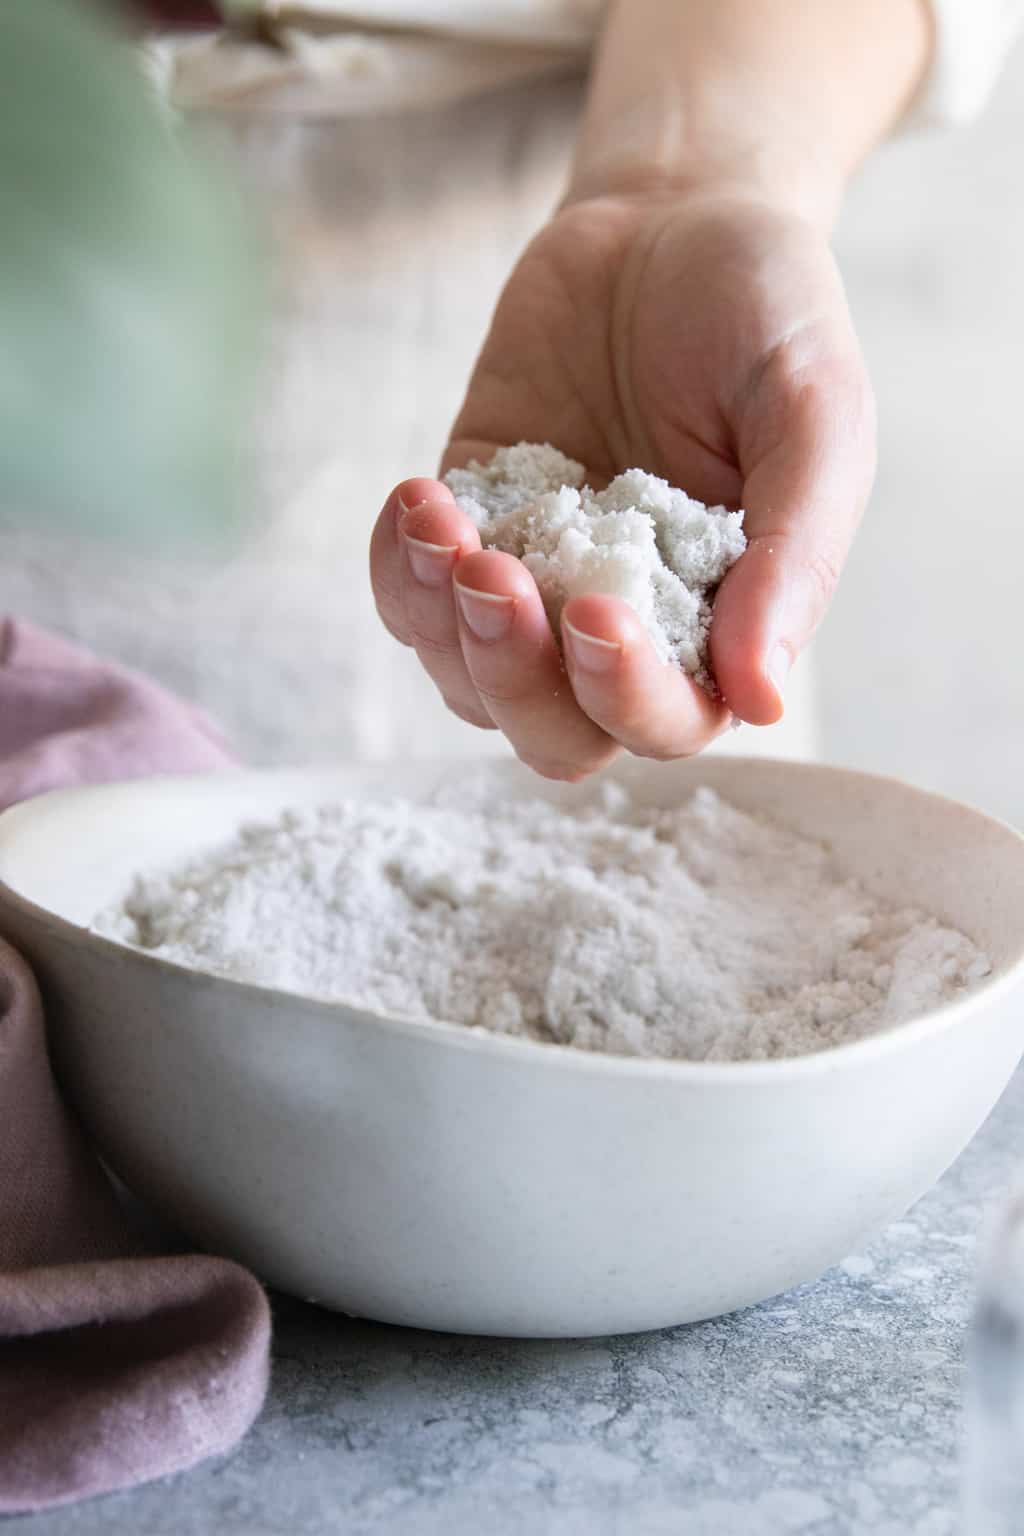 Making bath bombs? Your mixture should be the texture of clumpy sand